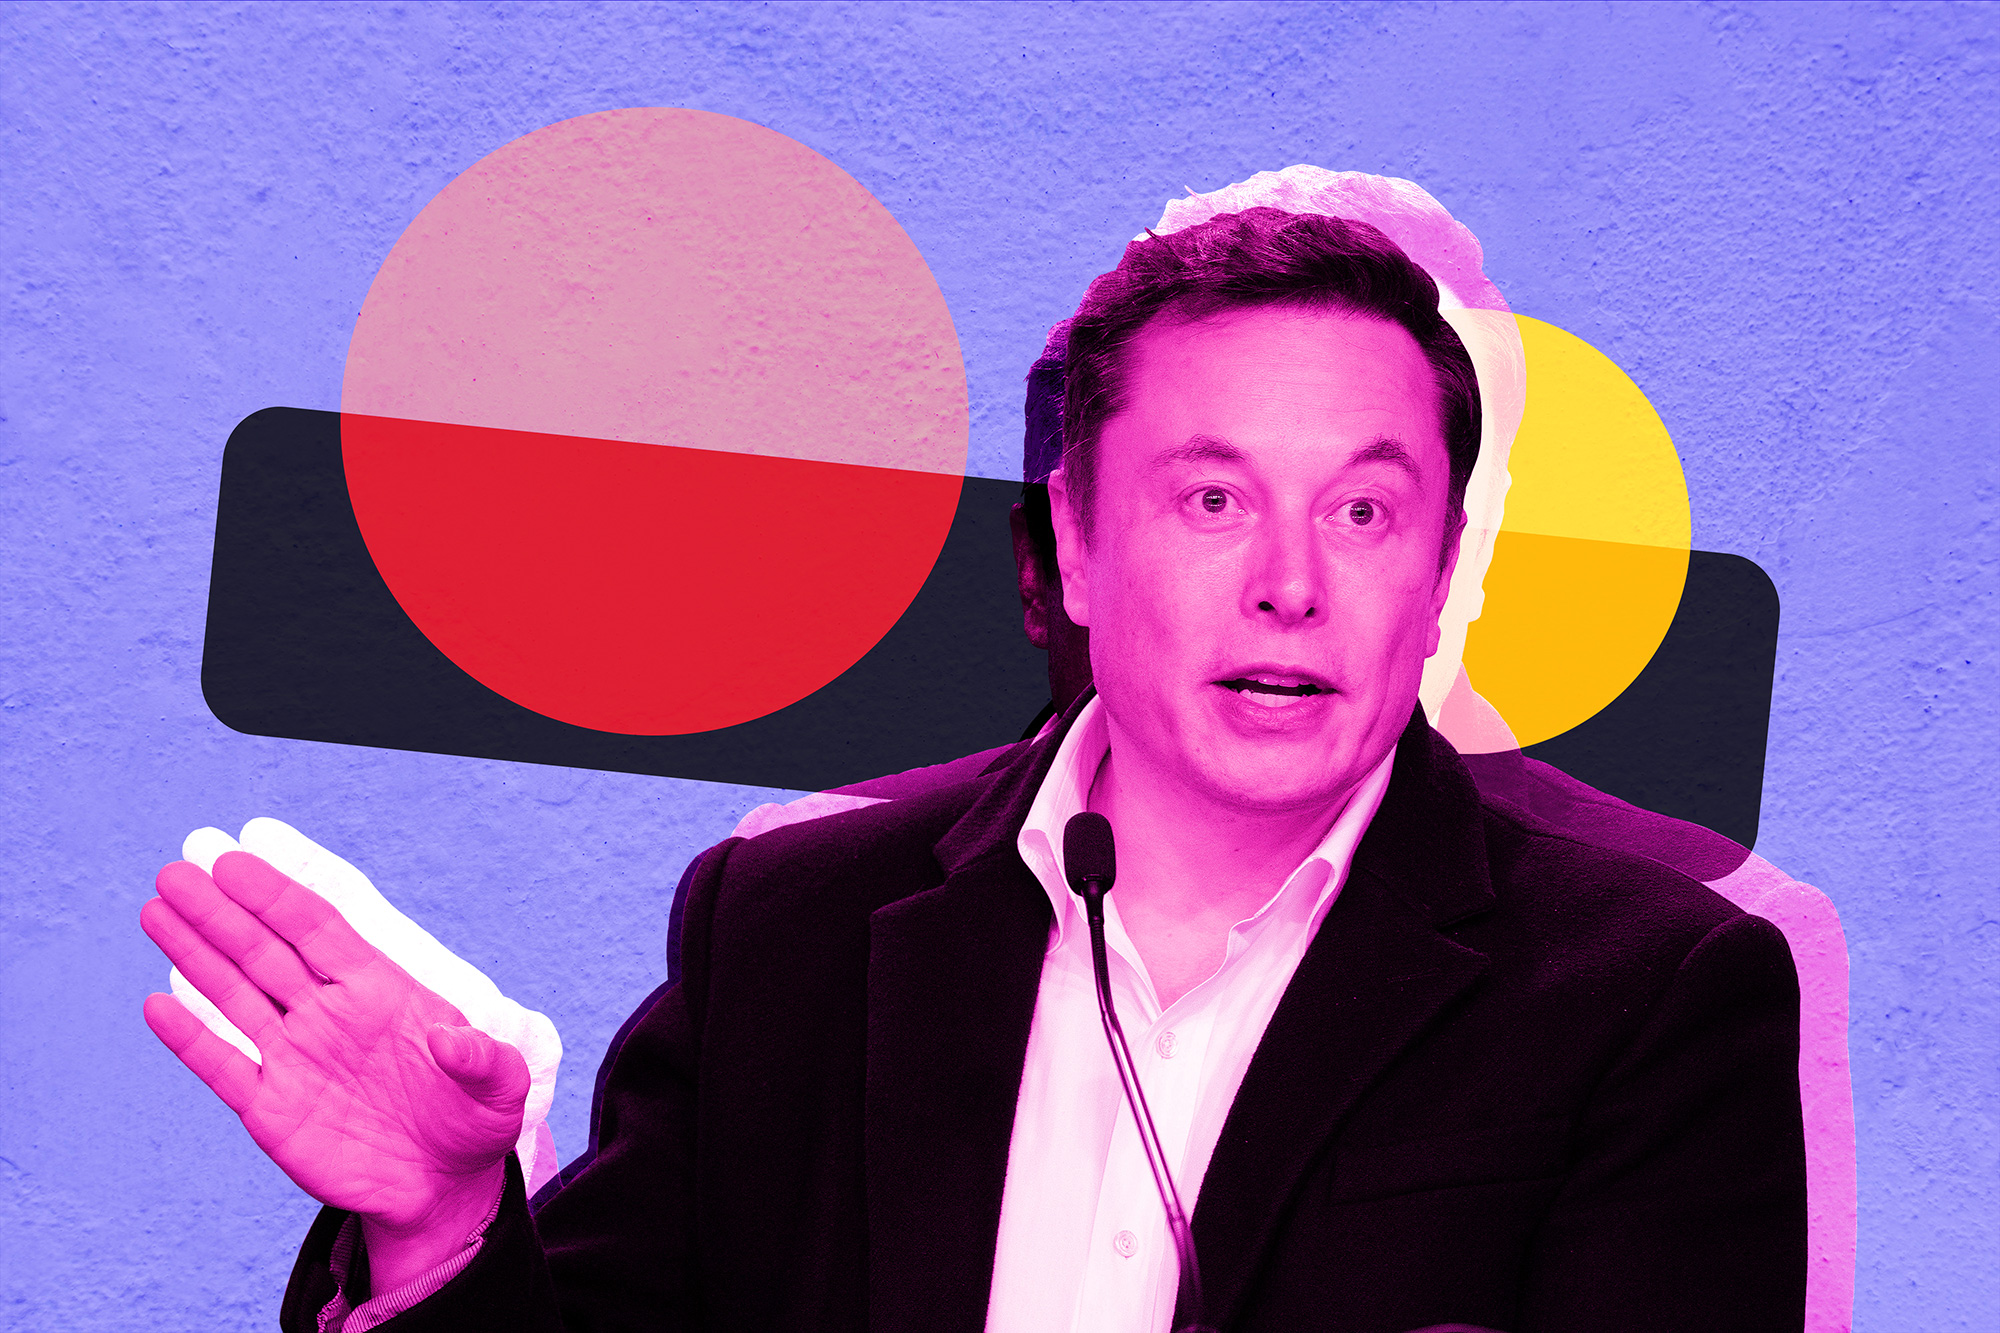 Elon Musk’s Twitter takeover is canceled: Here’s how we got here